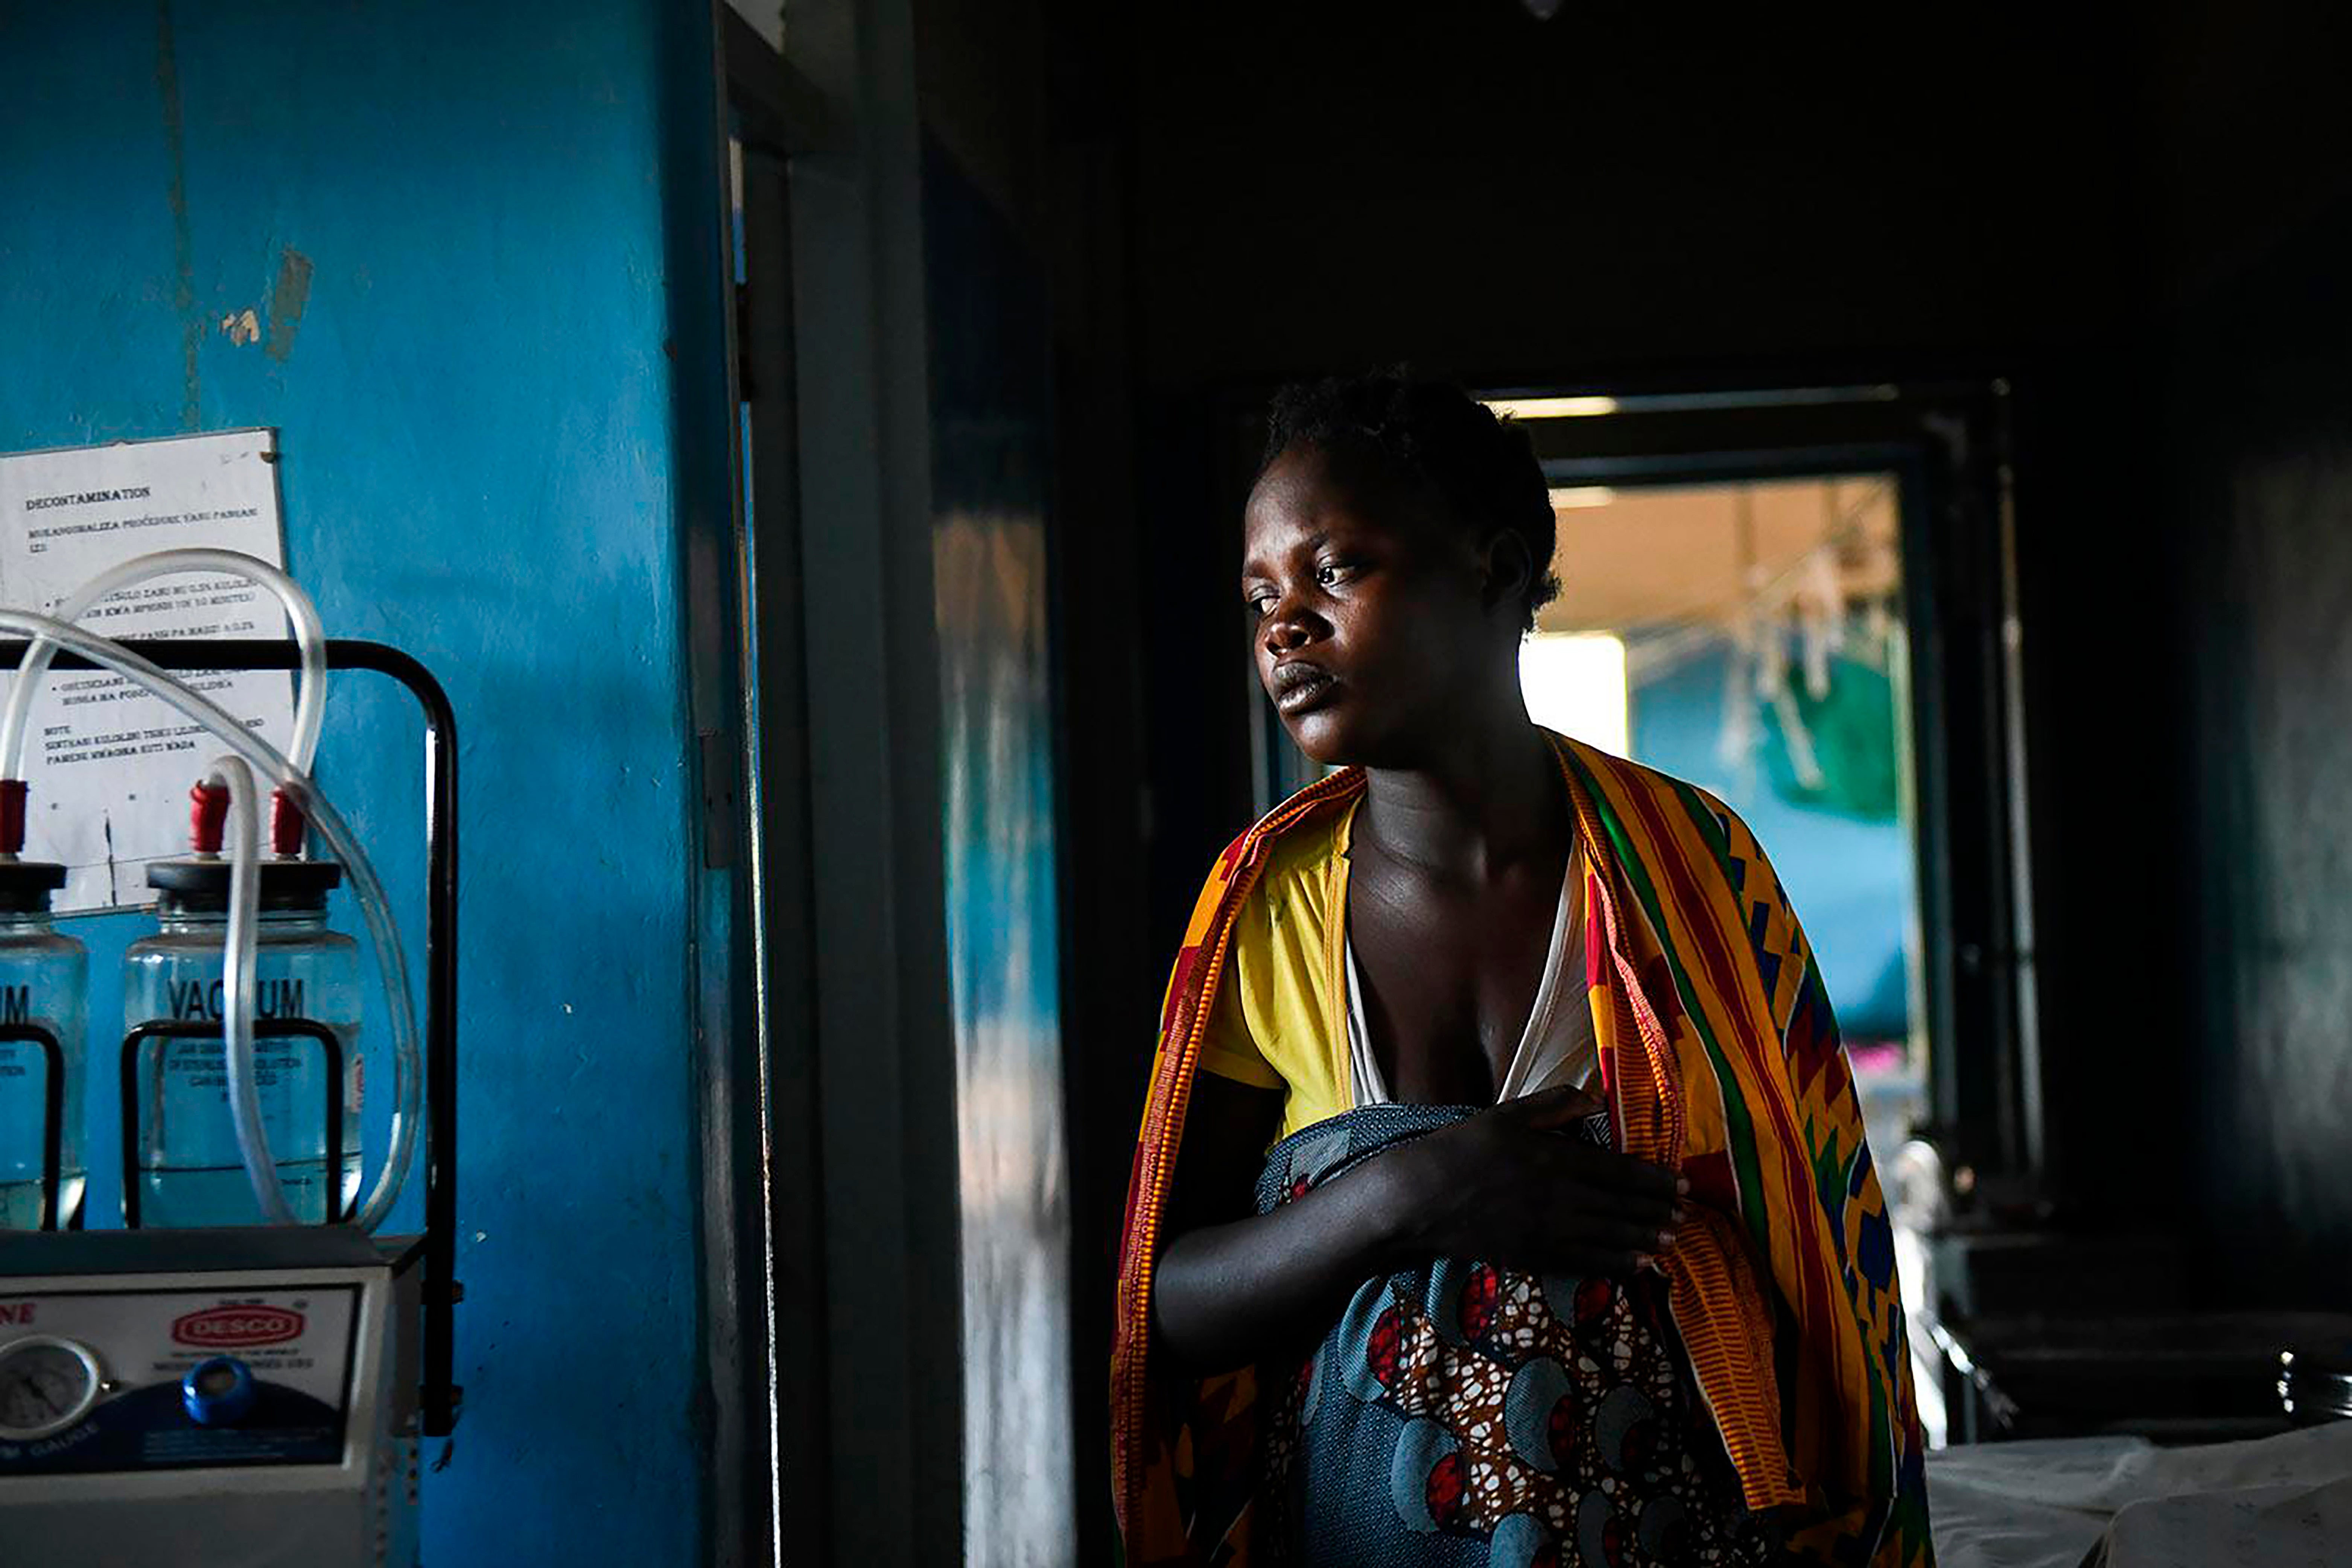 Health officials in Malawi say fewer women are getting prenatal care amid the Covid-19 pandemic